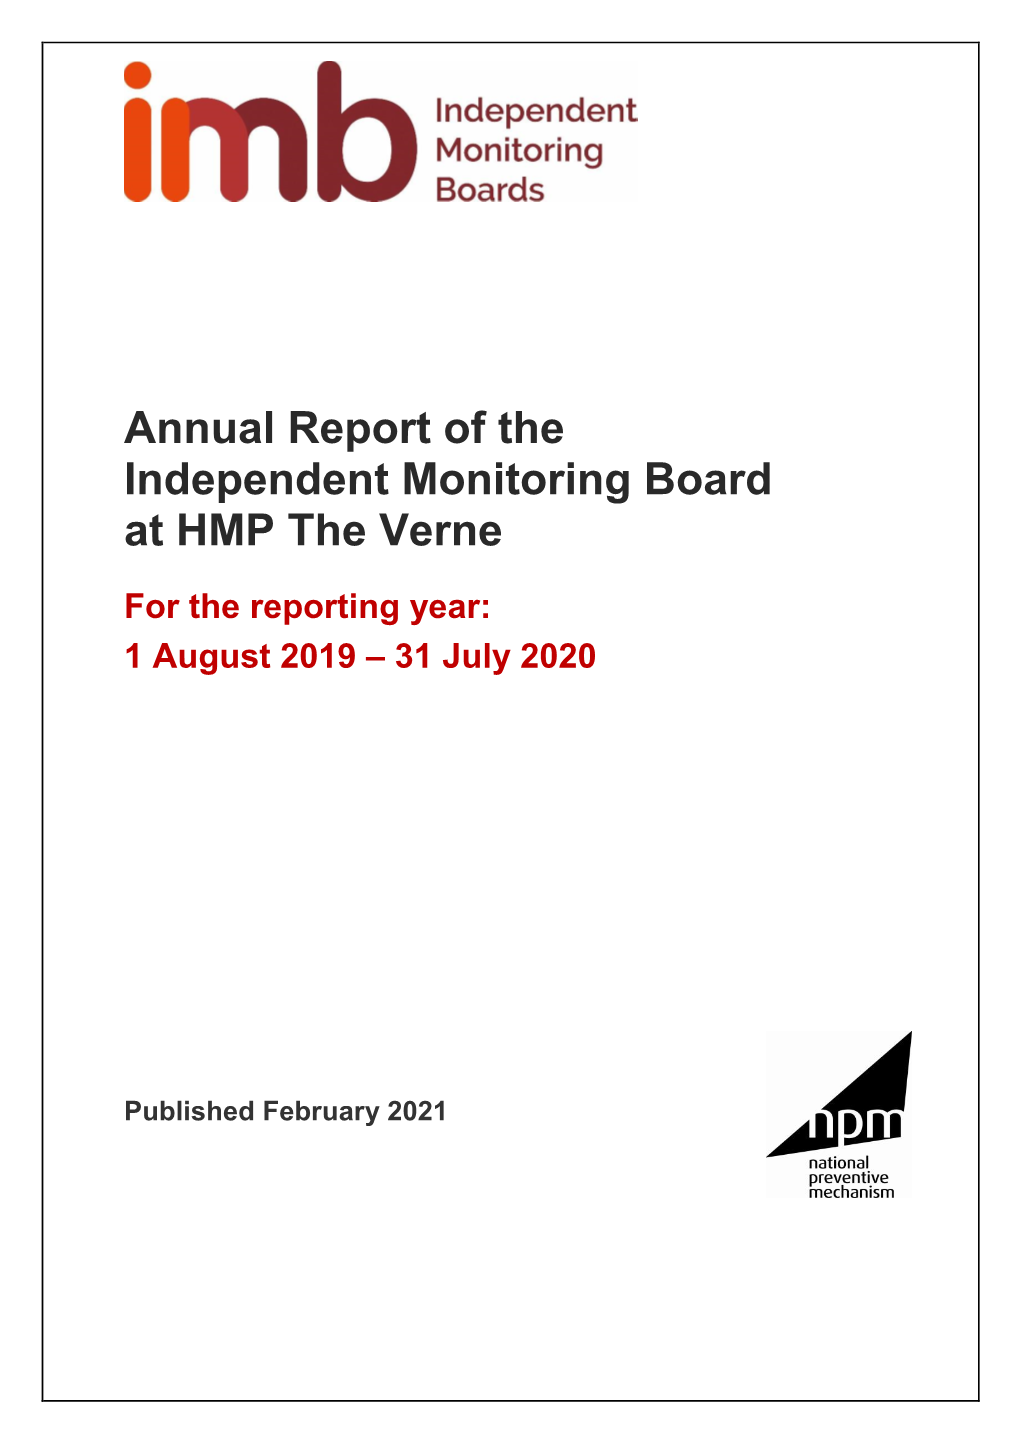 Annual Report of the Independent Monitoring Board at HMP the Verne